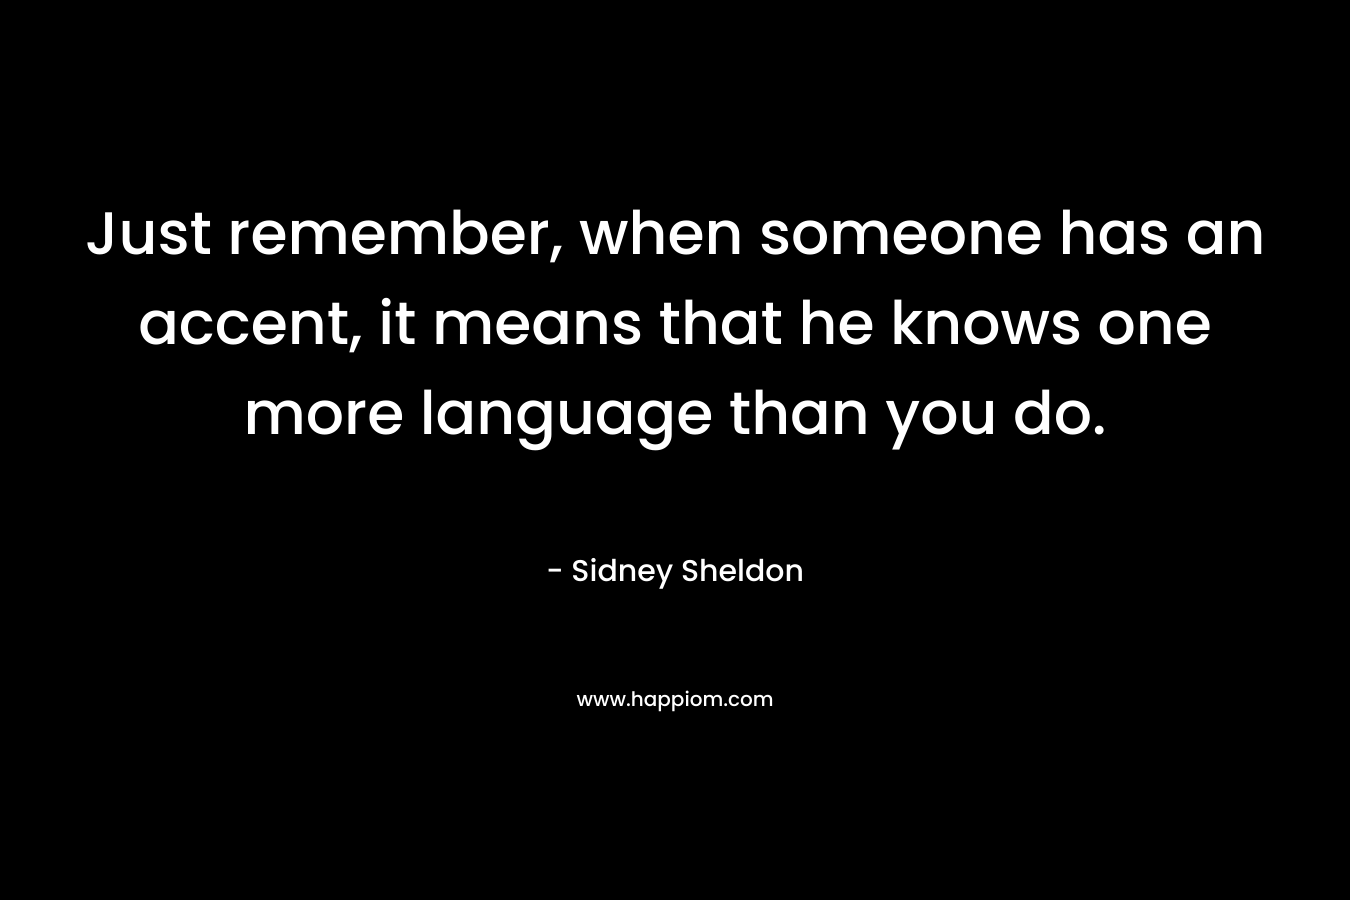 Just remember, when someone has an accent, it means that he knows one more language than you do. – Sidney Sheldon